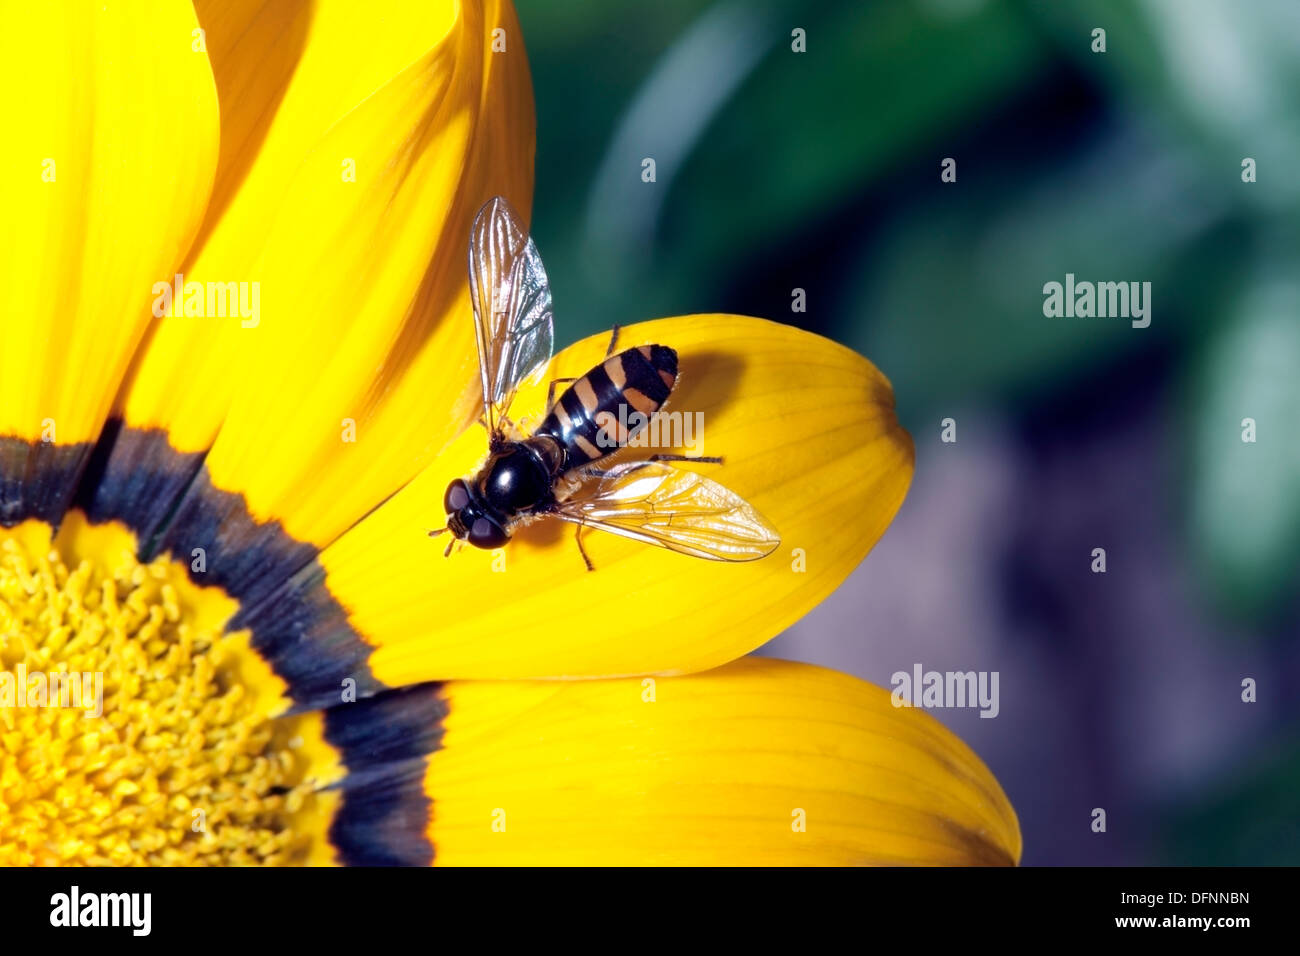 Close-up of Australian Common Hover / Flower Fly collecting pollen from Daisy - Melangyna viridiceps - Family Syrphidae Stock Photo